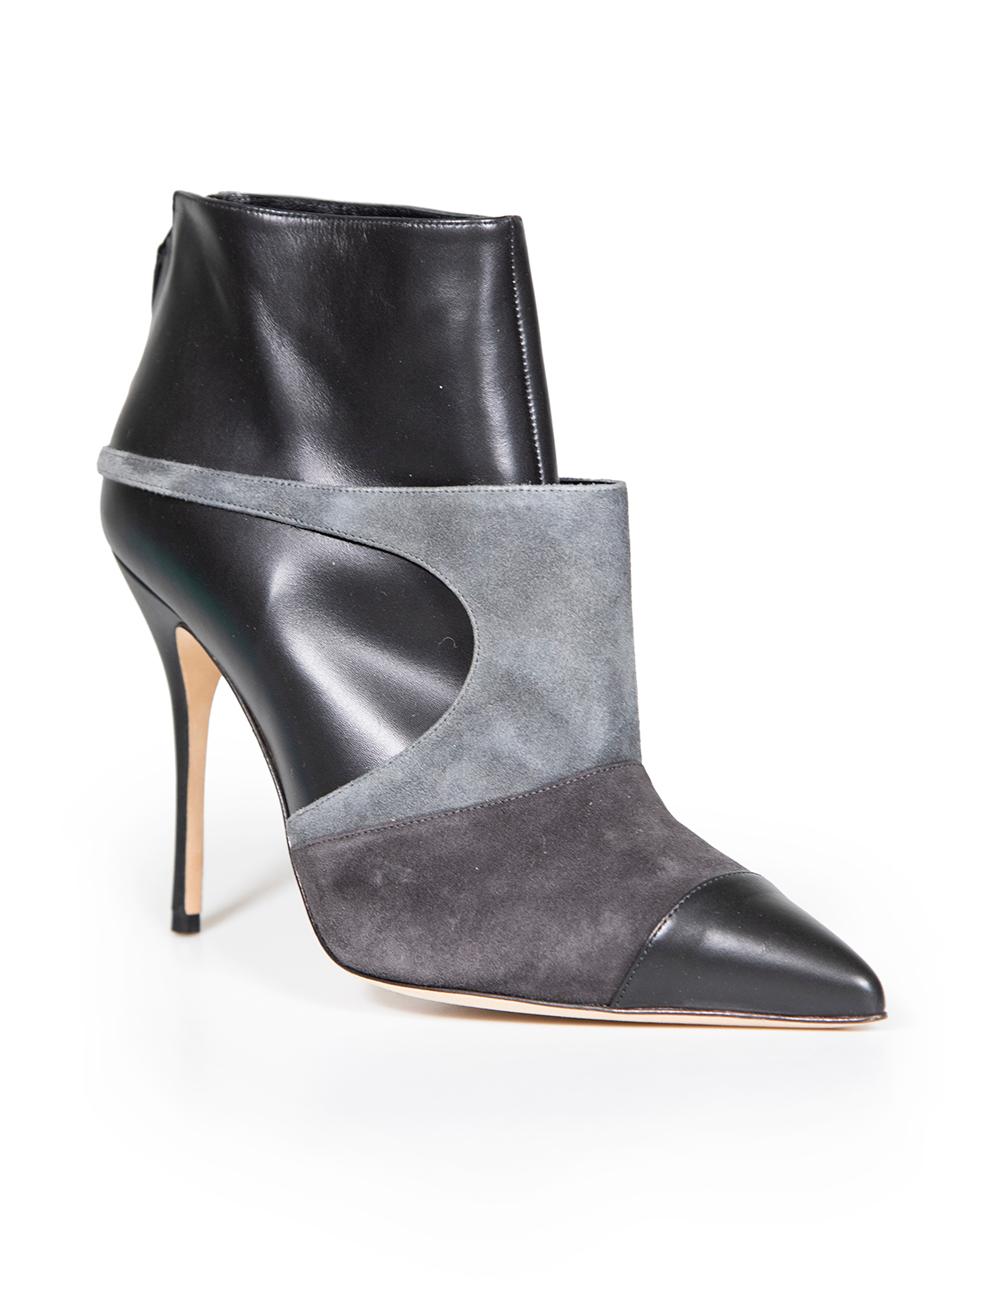 CONDITION is Very good. Hardly any visible wear to boots is evident on this used Manolo Blahnik designer resale item.
 
 Details
 Black
 Leather
 Ankle boots
 Pointed toe
 High heel
 Grey suede cut out panel
 Black leather cap toe
 Back zip closure
